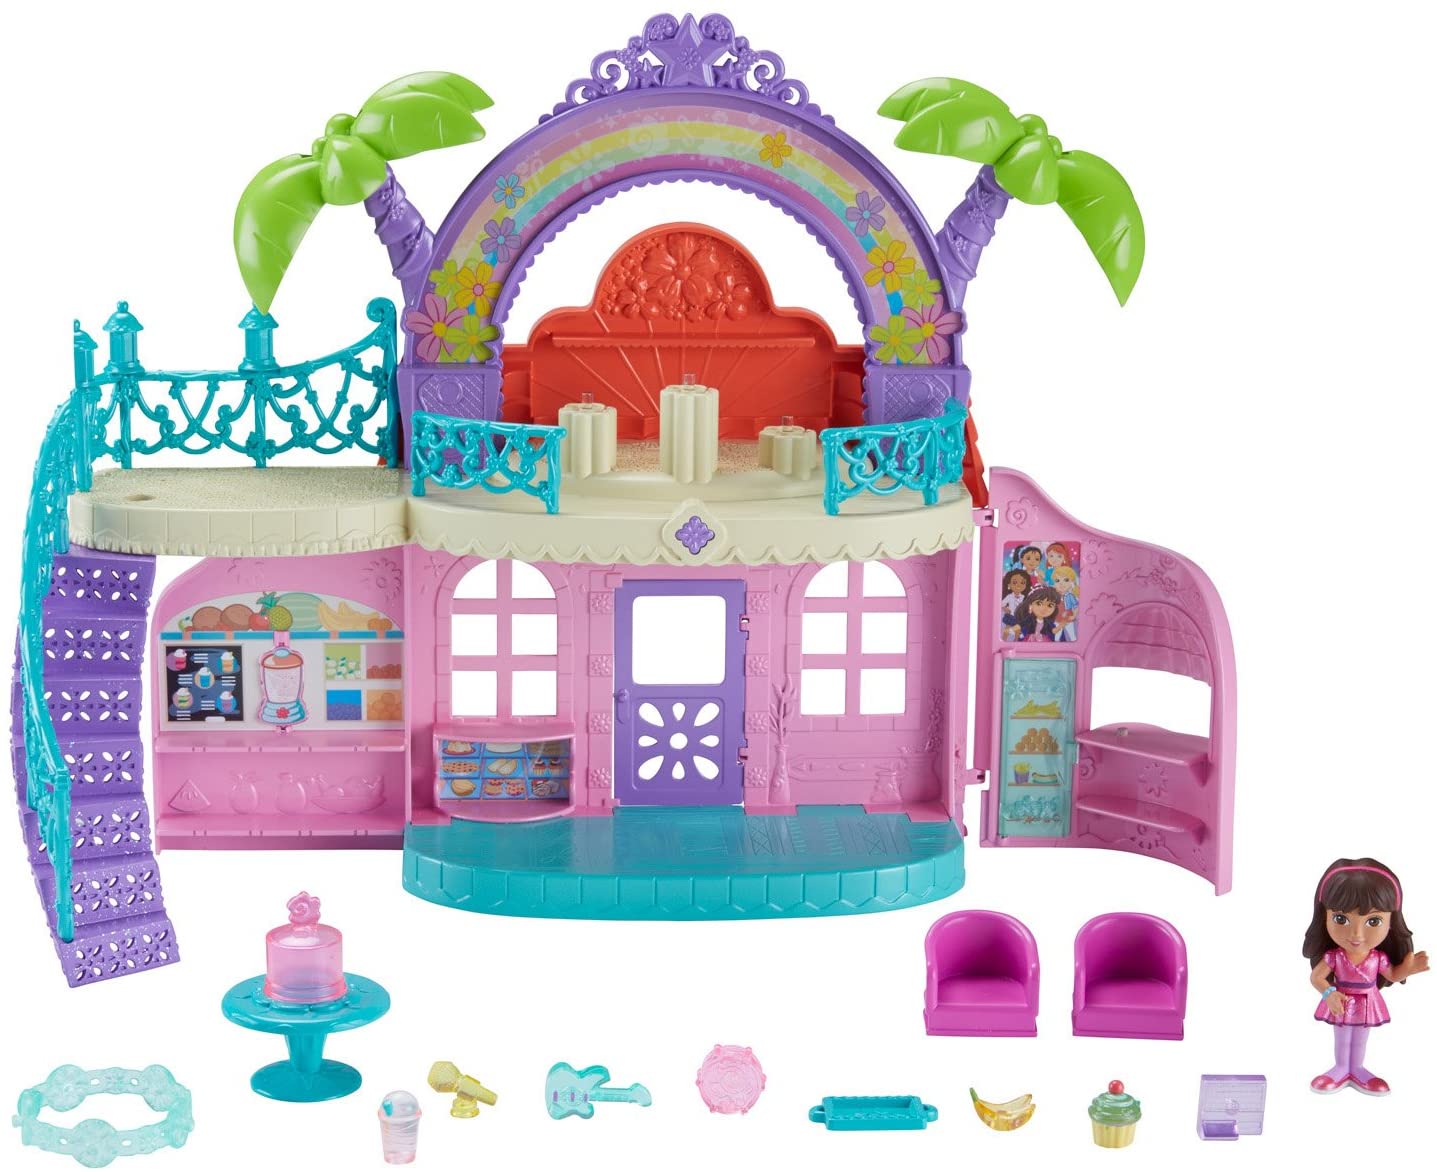 9 Best Fisher Price Dollhouse Reviews of 2022 6